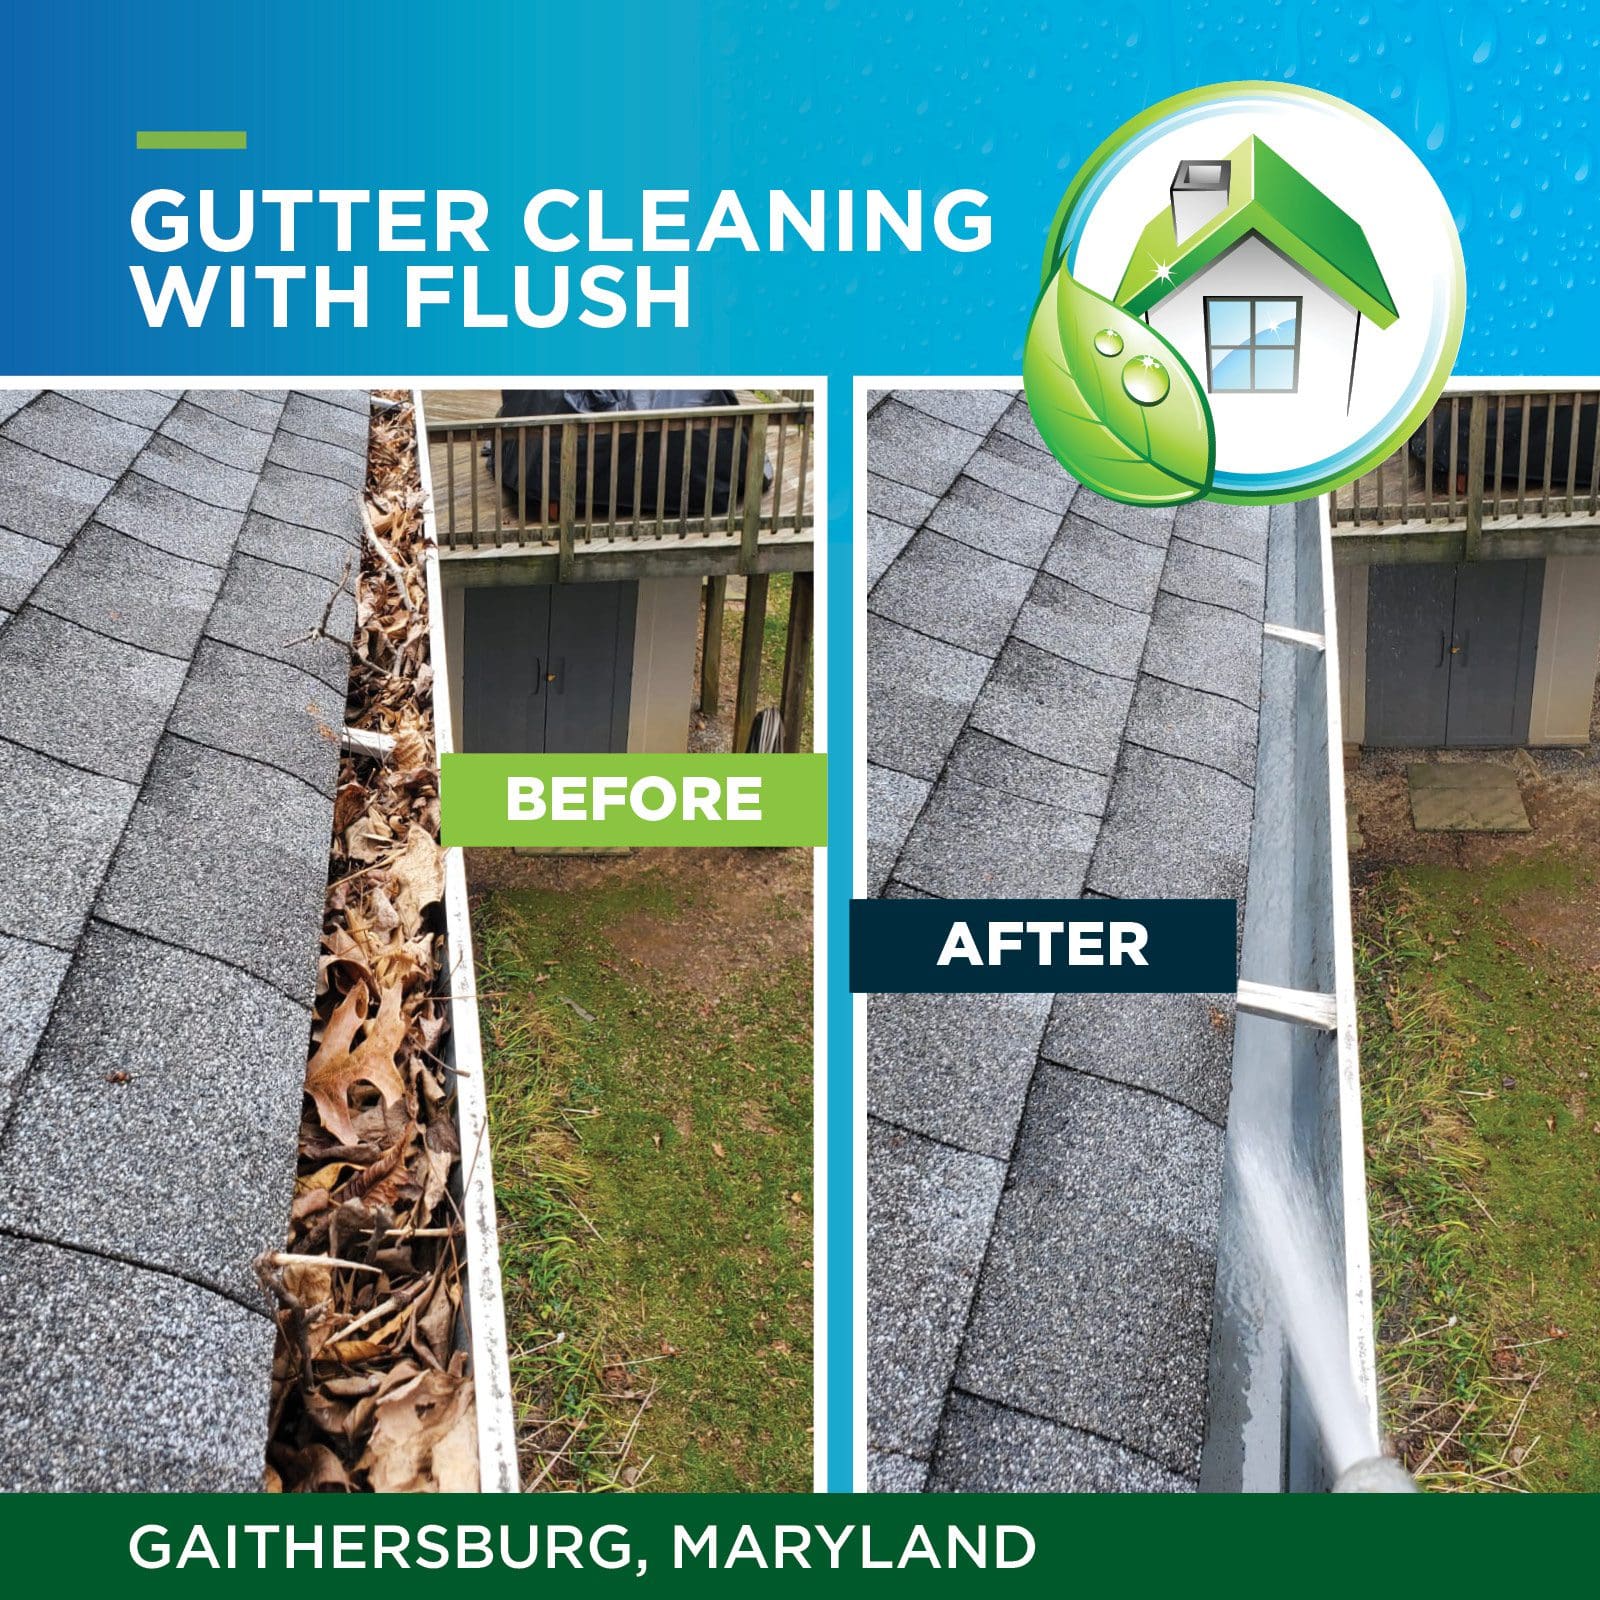 Gutter cleaning with flush in Gaithersburg maryland